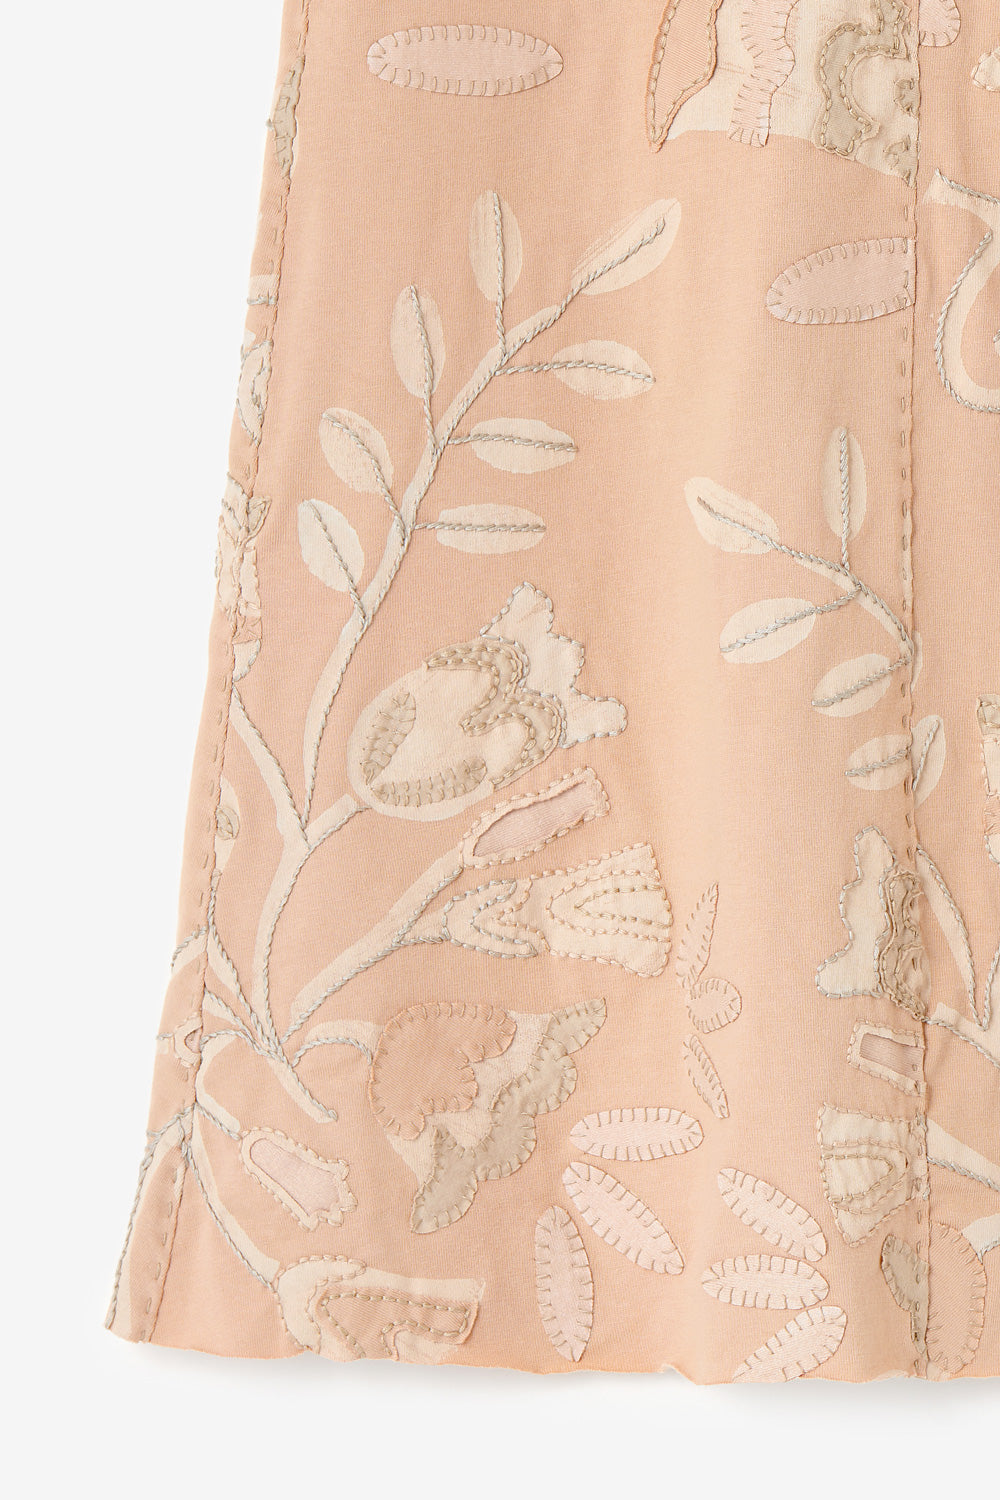 Detail of the Somerset Skirt with hand-sewn appliqué and embroidery.